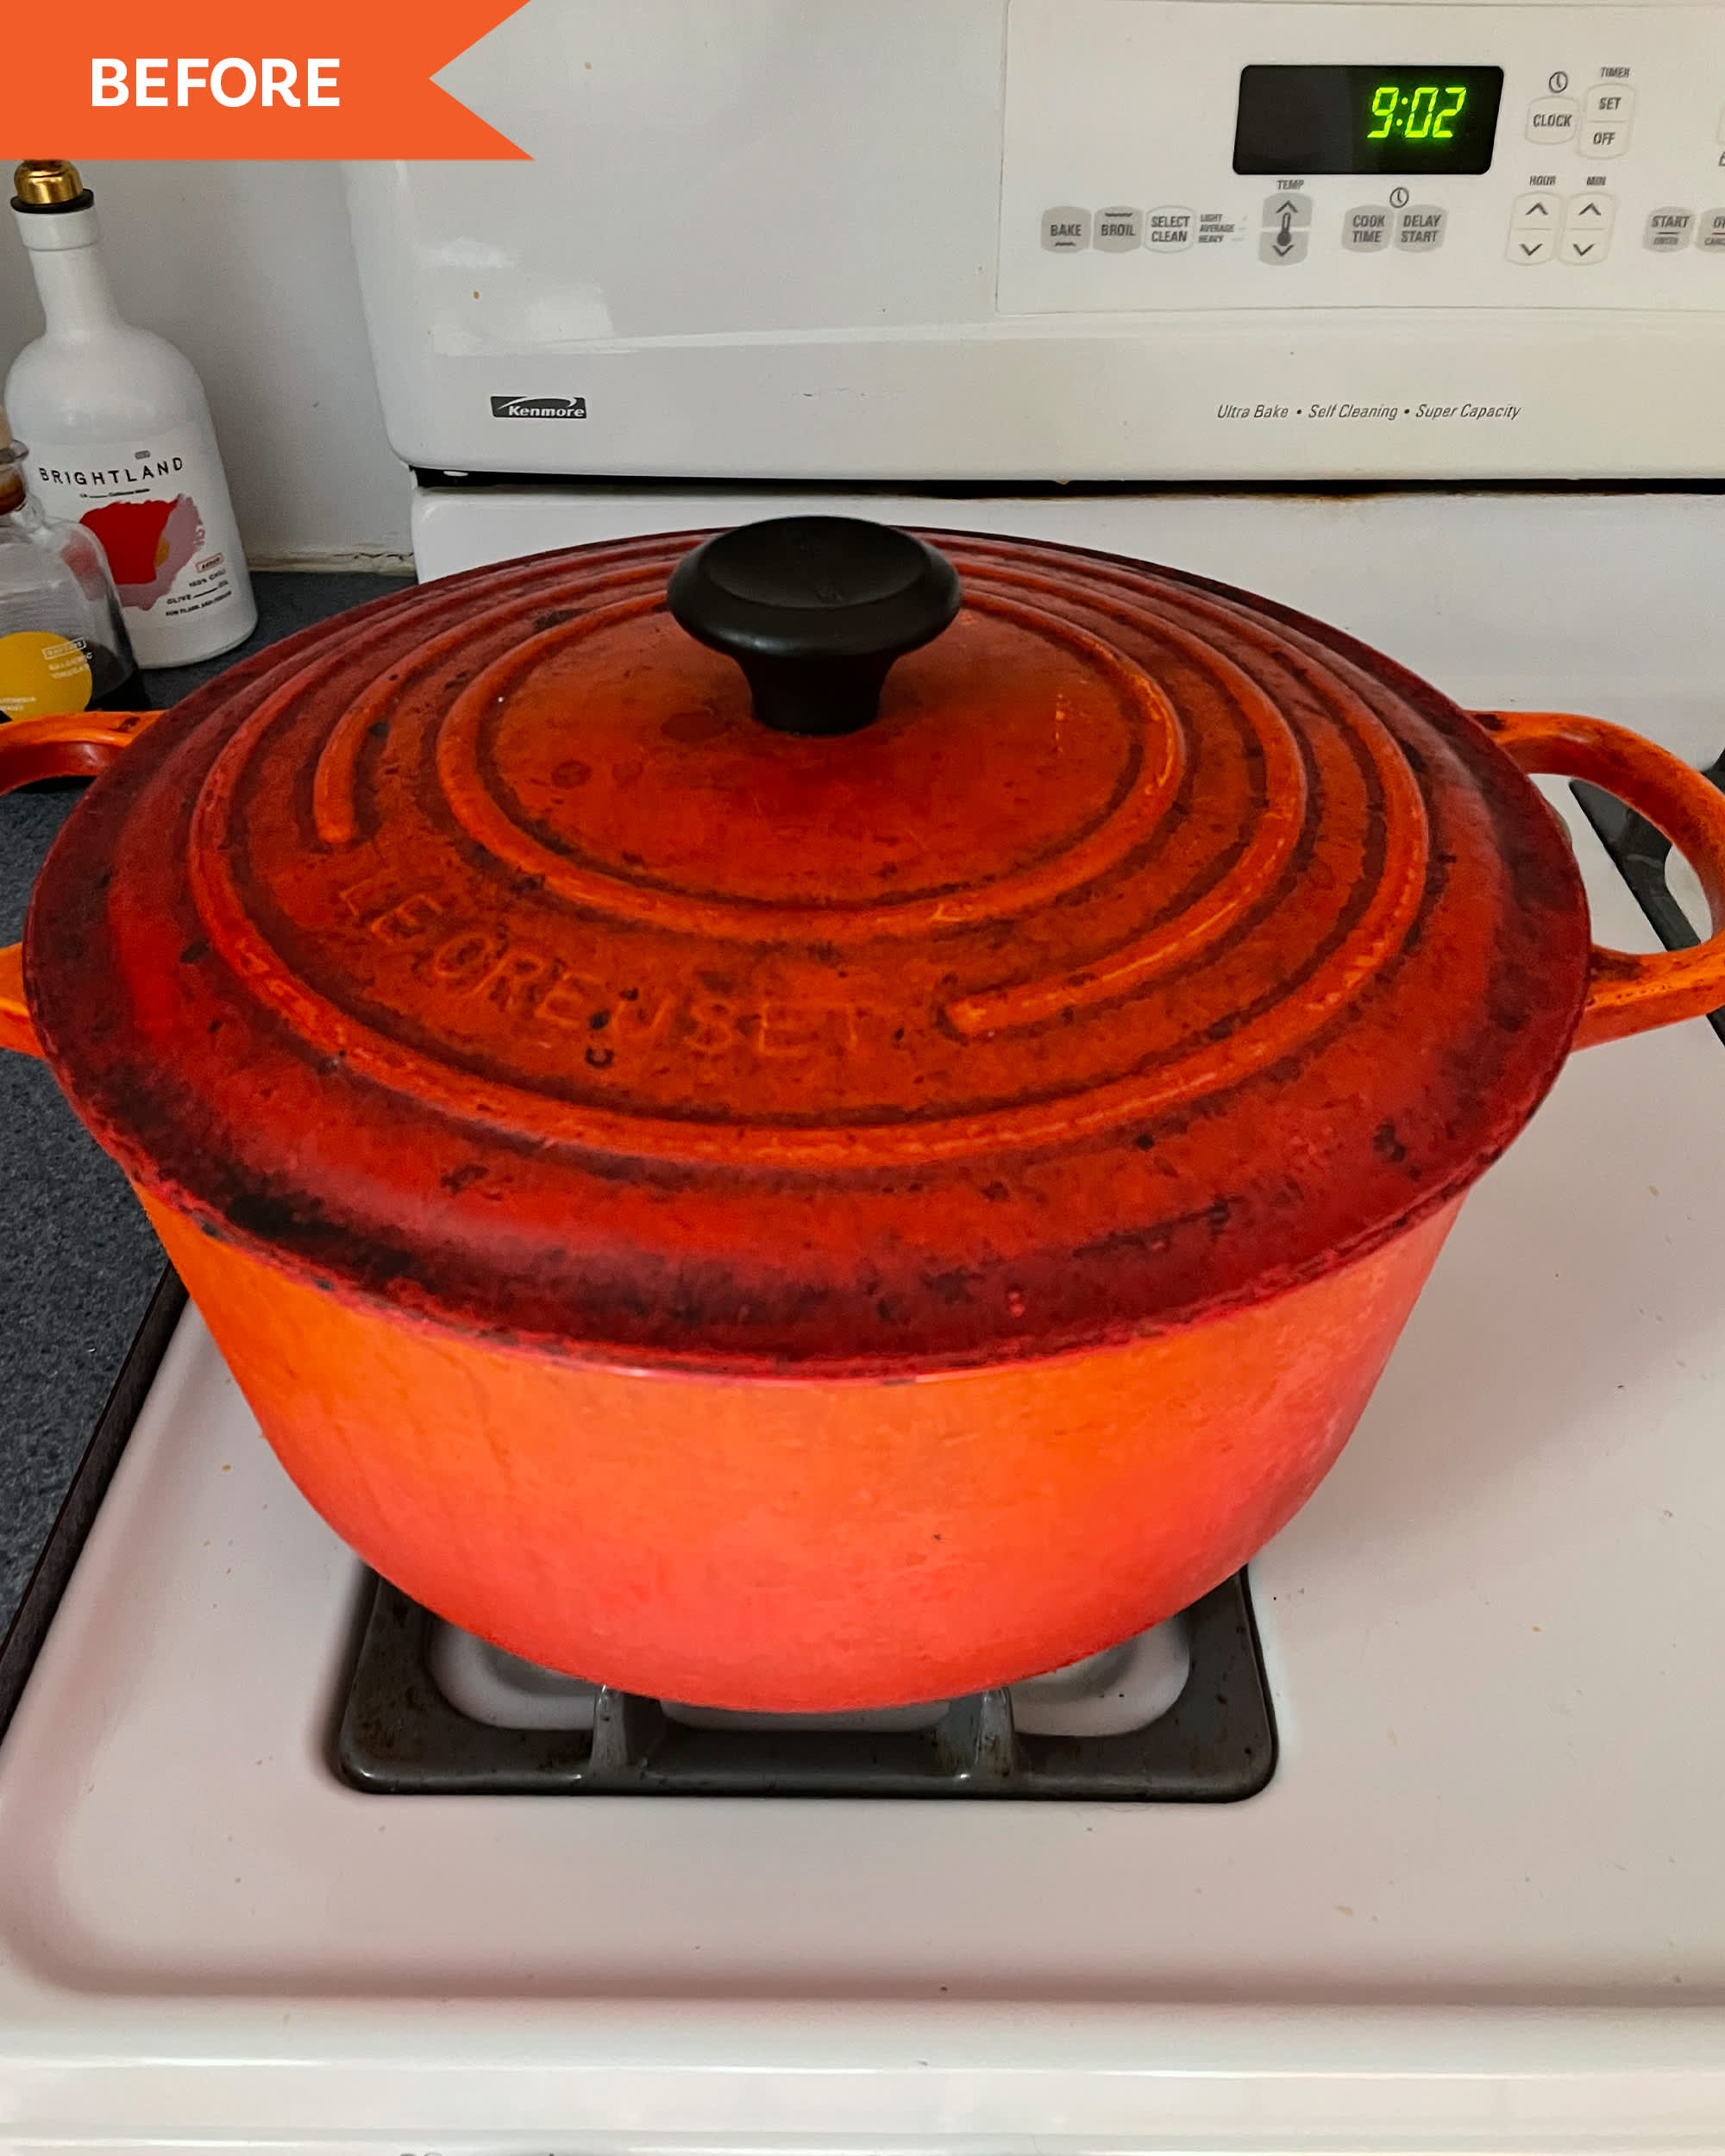 How can I fix this badly stained Cuisinart dutch oven? : r